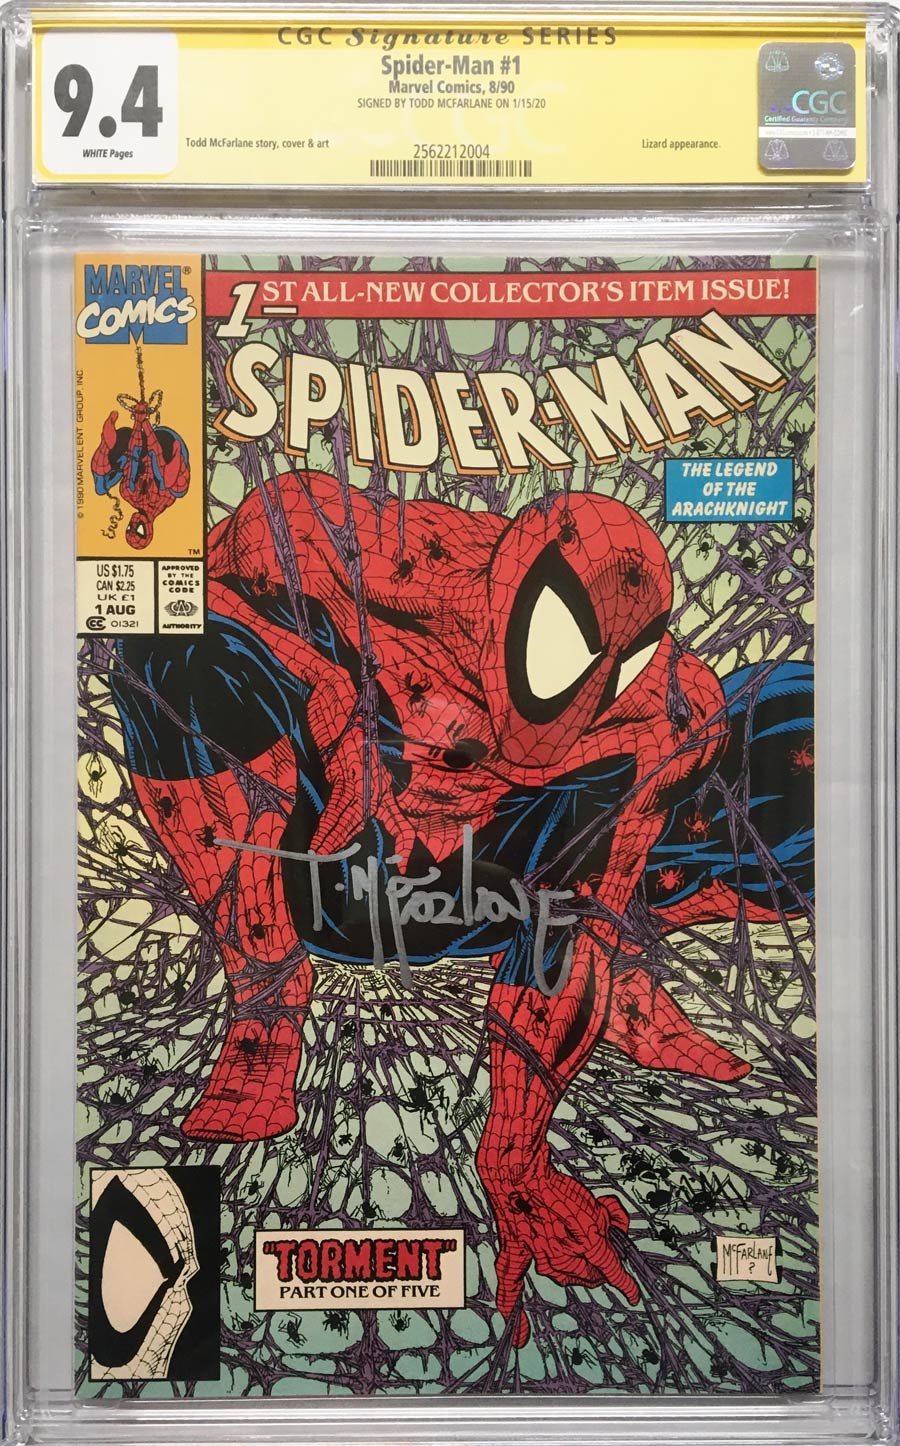 Spider-Man #1 Cover N CGC 9.4 1st Ptg Regular Edition Signed by Todd McFarlane